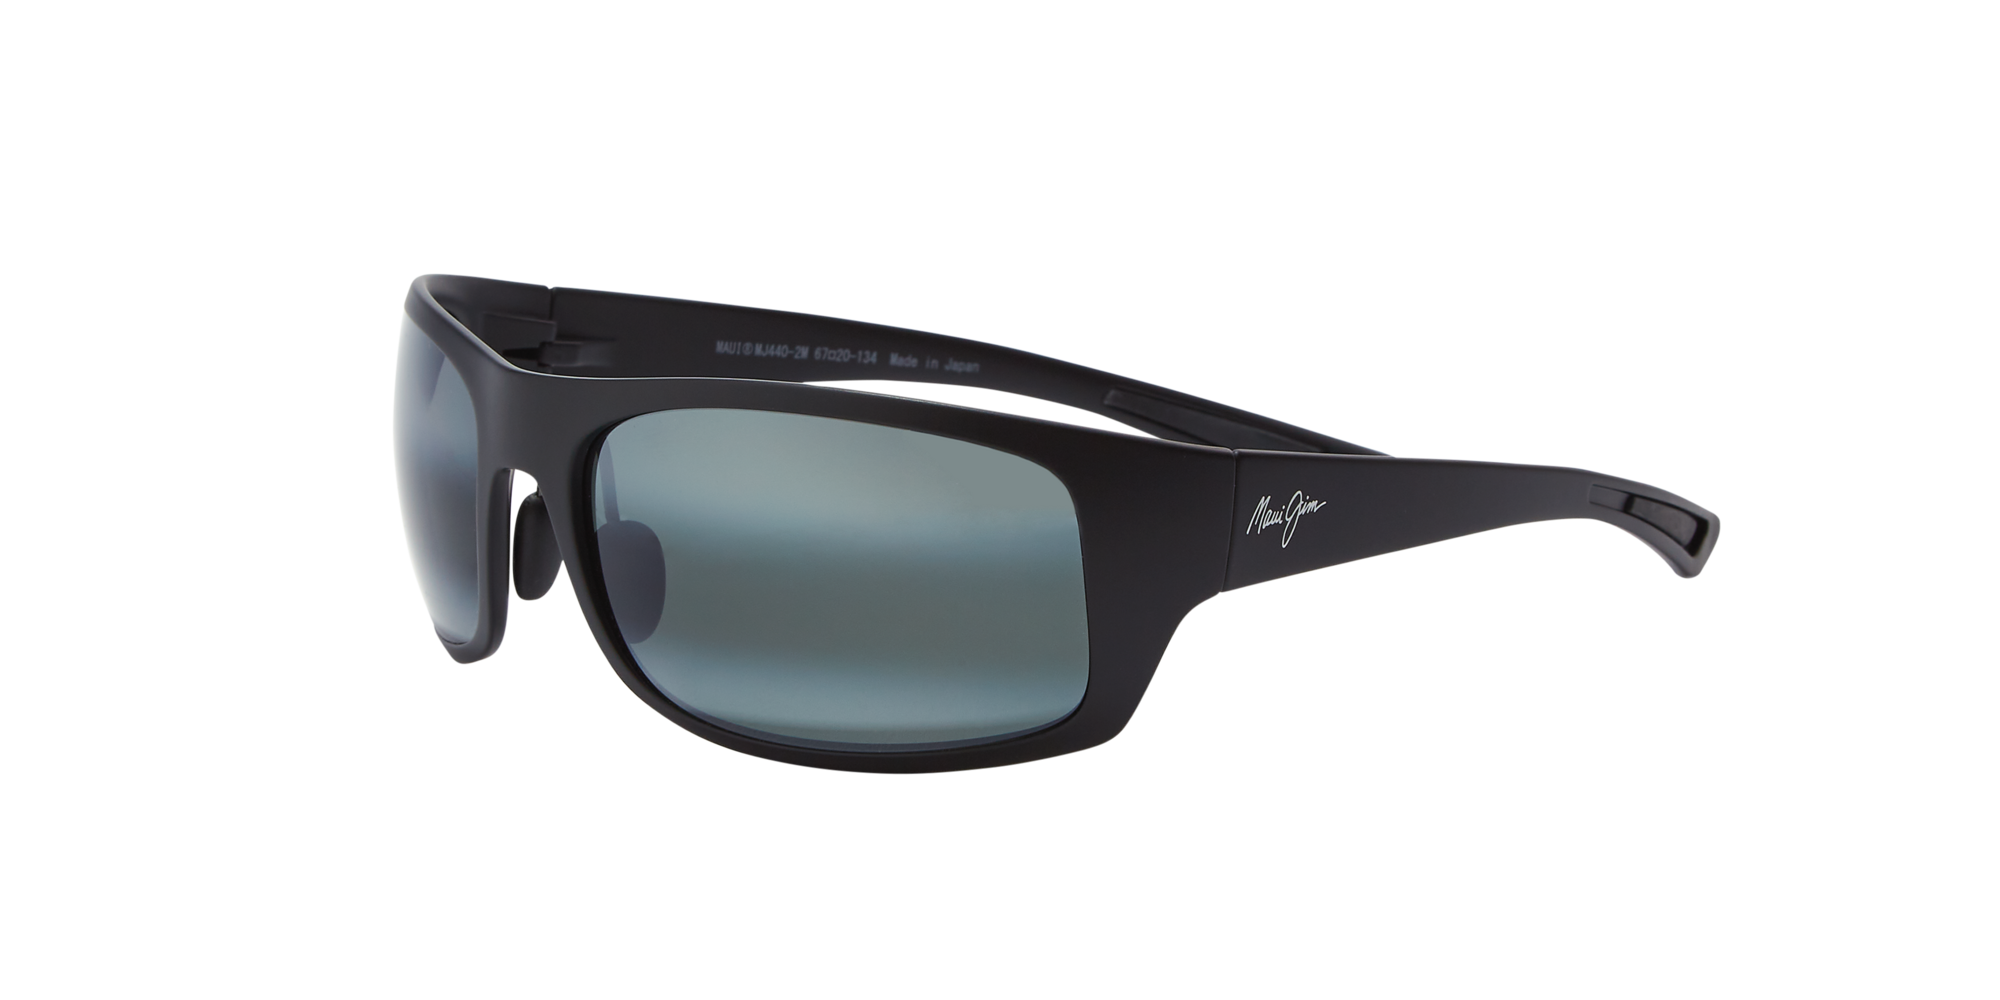 Maui Jim Ho'okipa Sunglasses Review and Unboxing | SportRx - YouTube